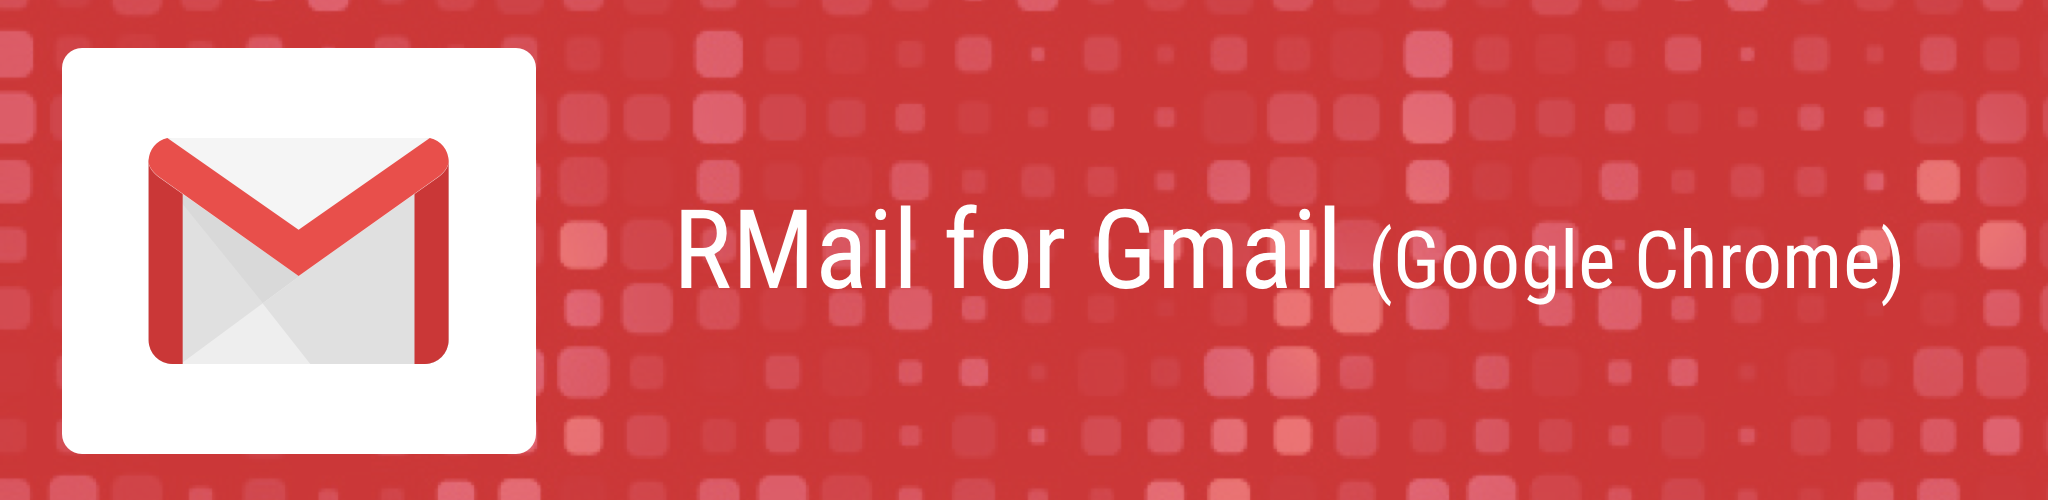 RMail for Gmail